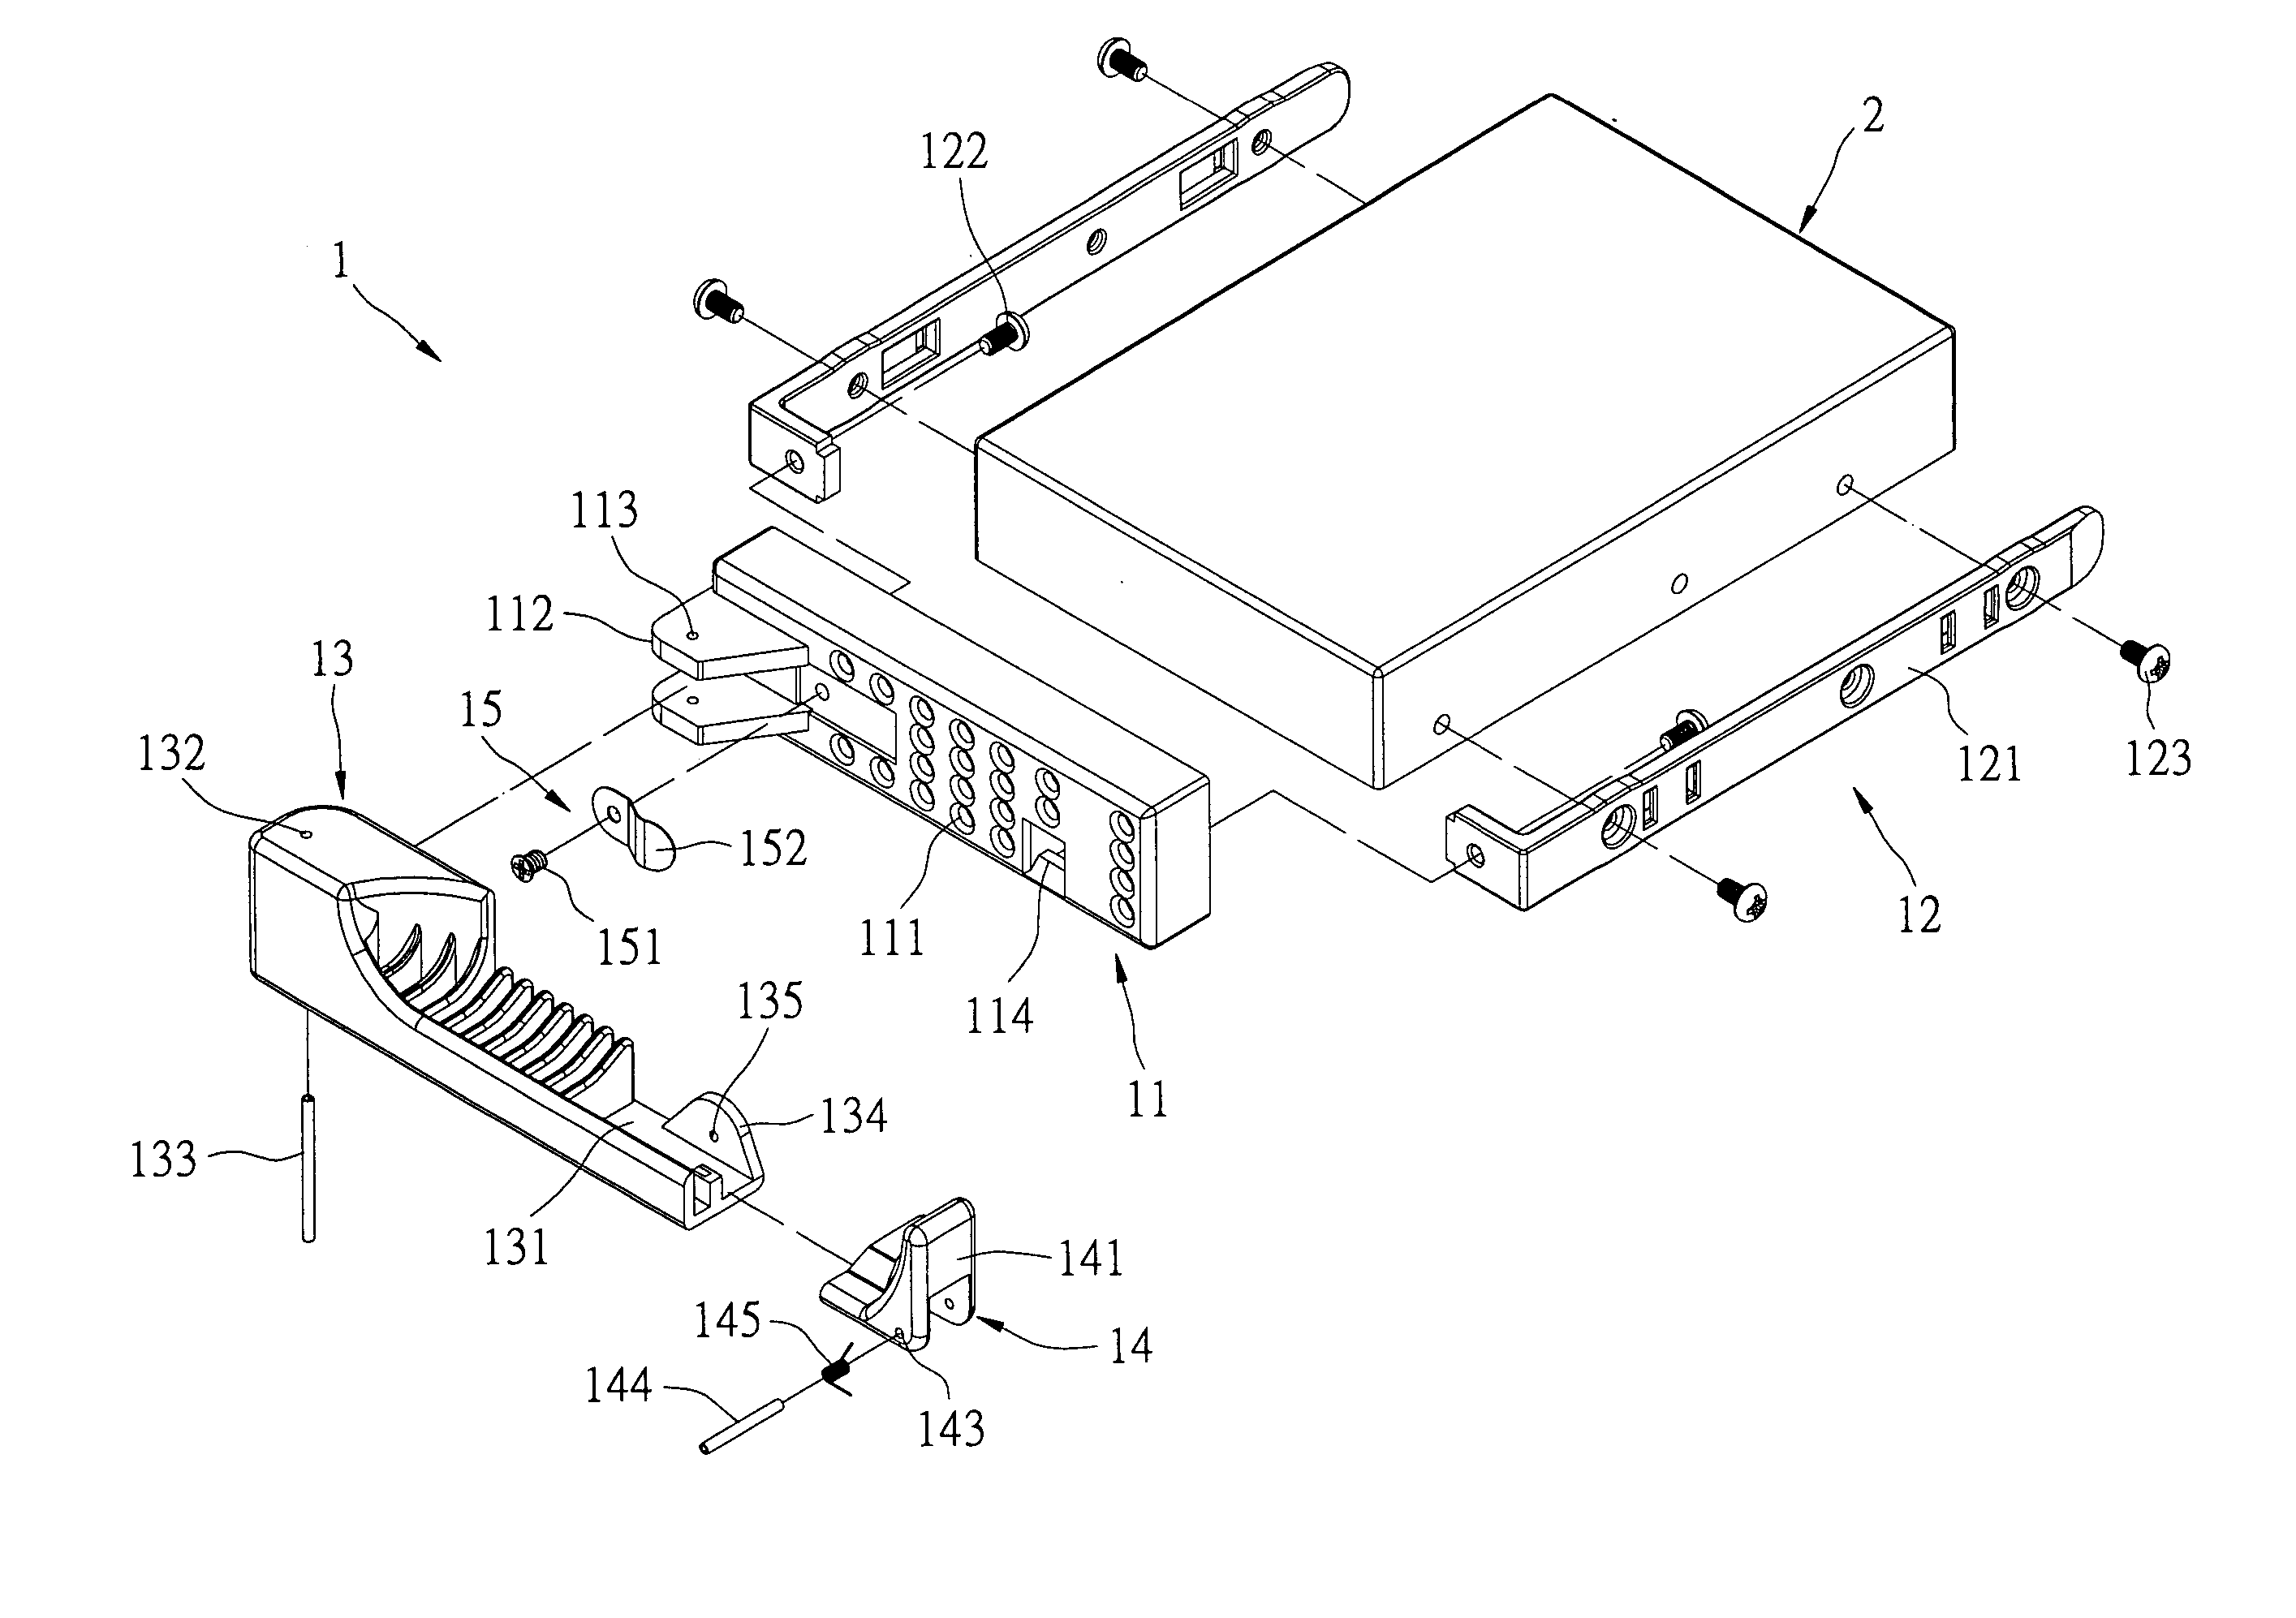 Removable hard disk housing assembly